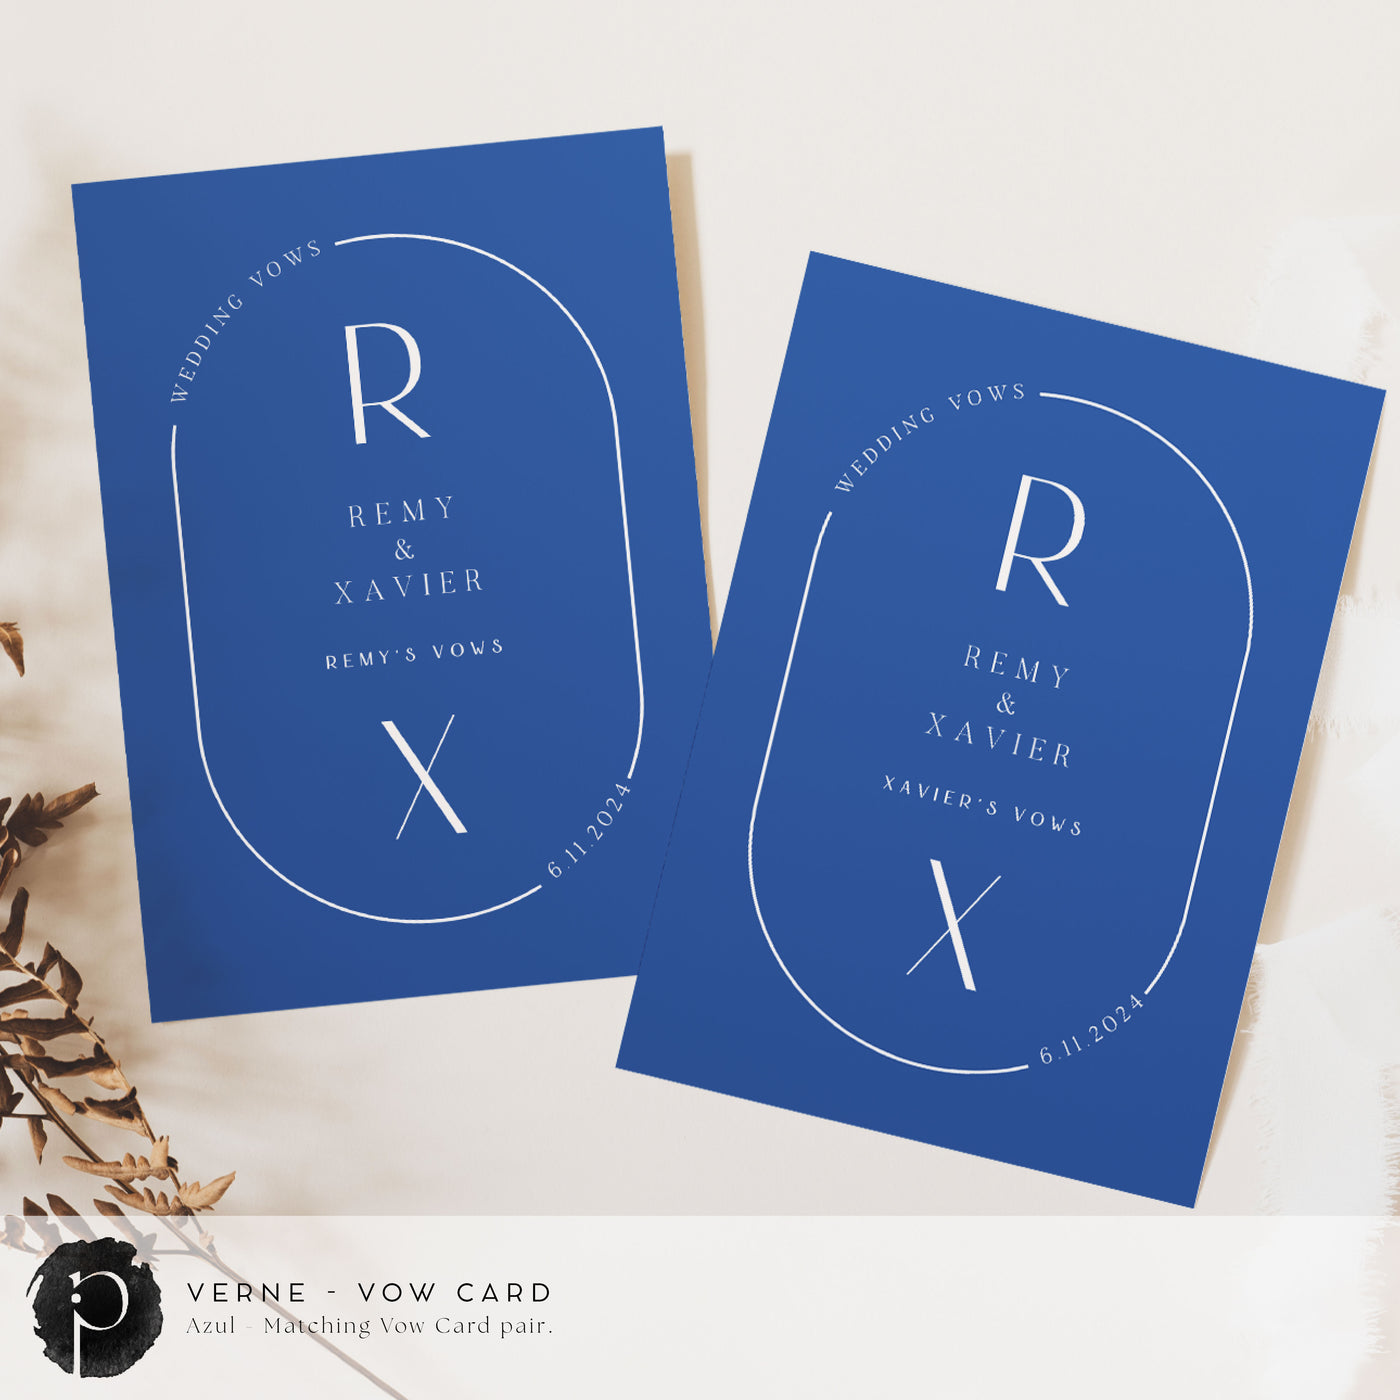 A pair of vow cards to write your wedding vows on in a modern midcentury wedding theme with white writing on an indigo blue or cobalt blue background